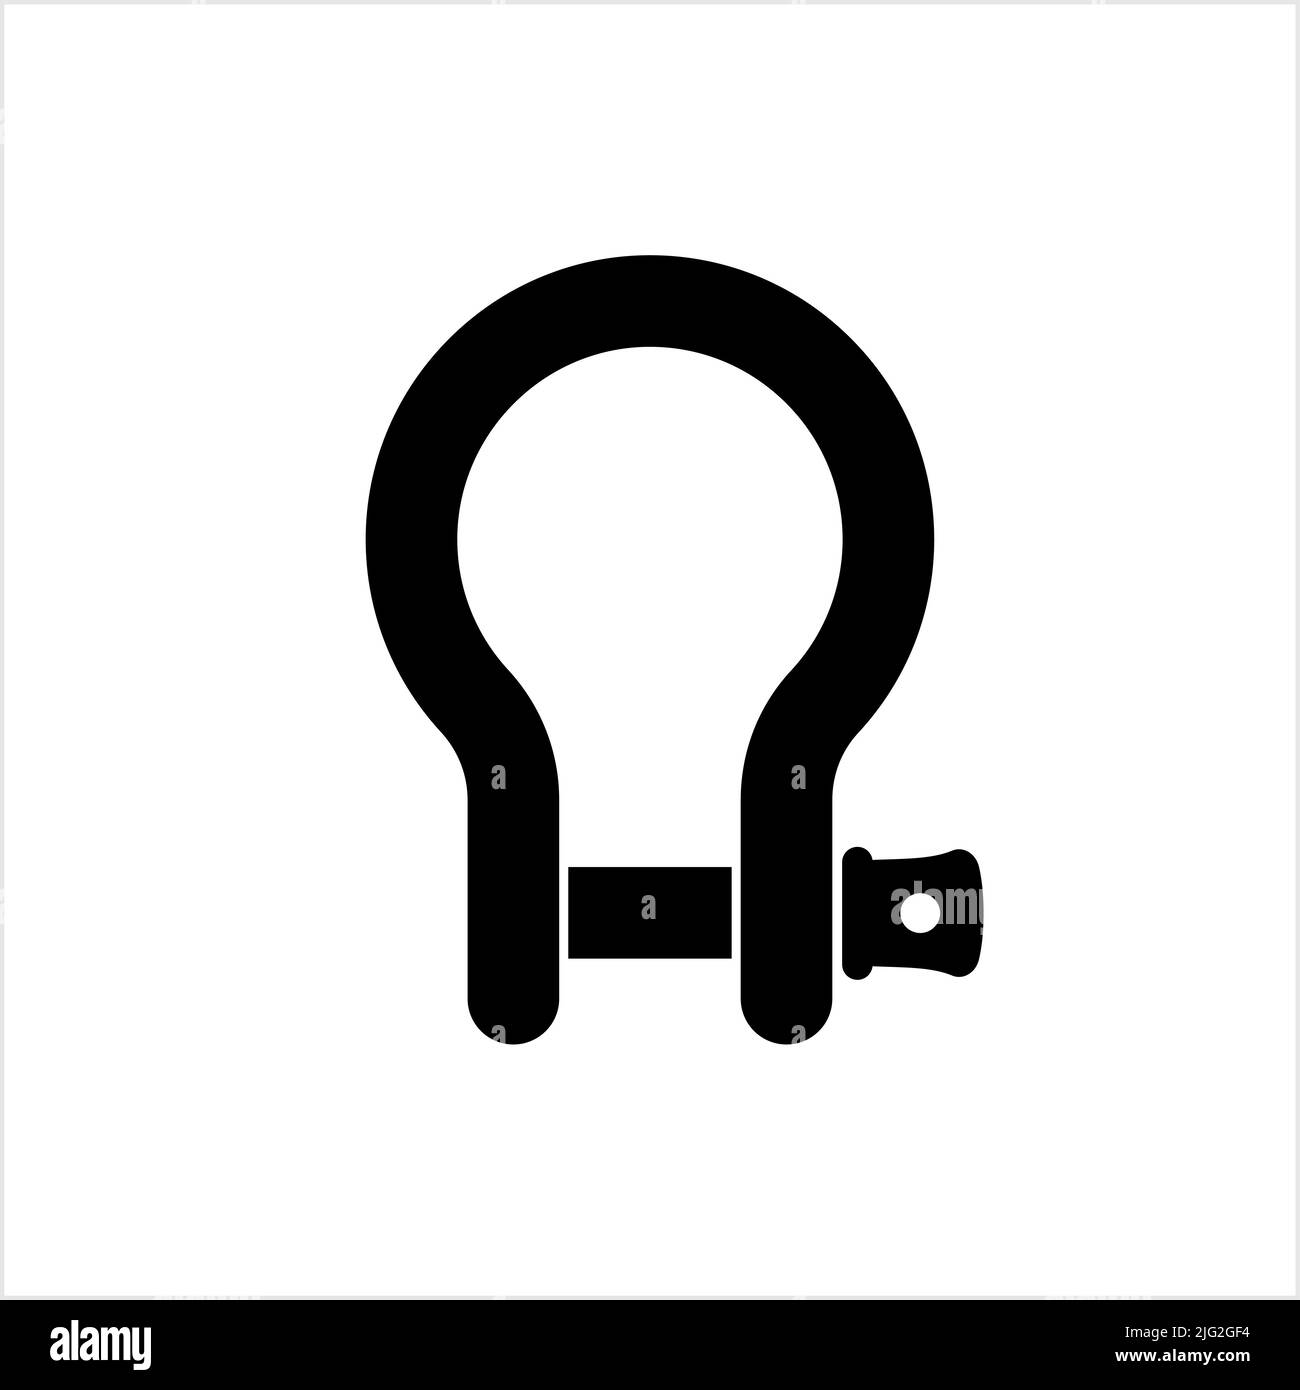 Shackle Icon, Gyve Icon, U Shaped Piece Of Metal With A Clevis Pin, Bolt Vector Art Illustration Stock Vector